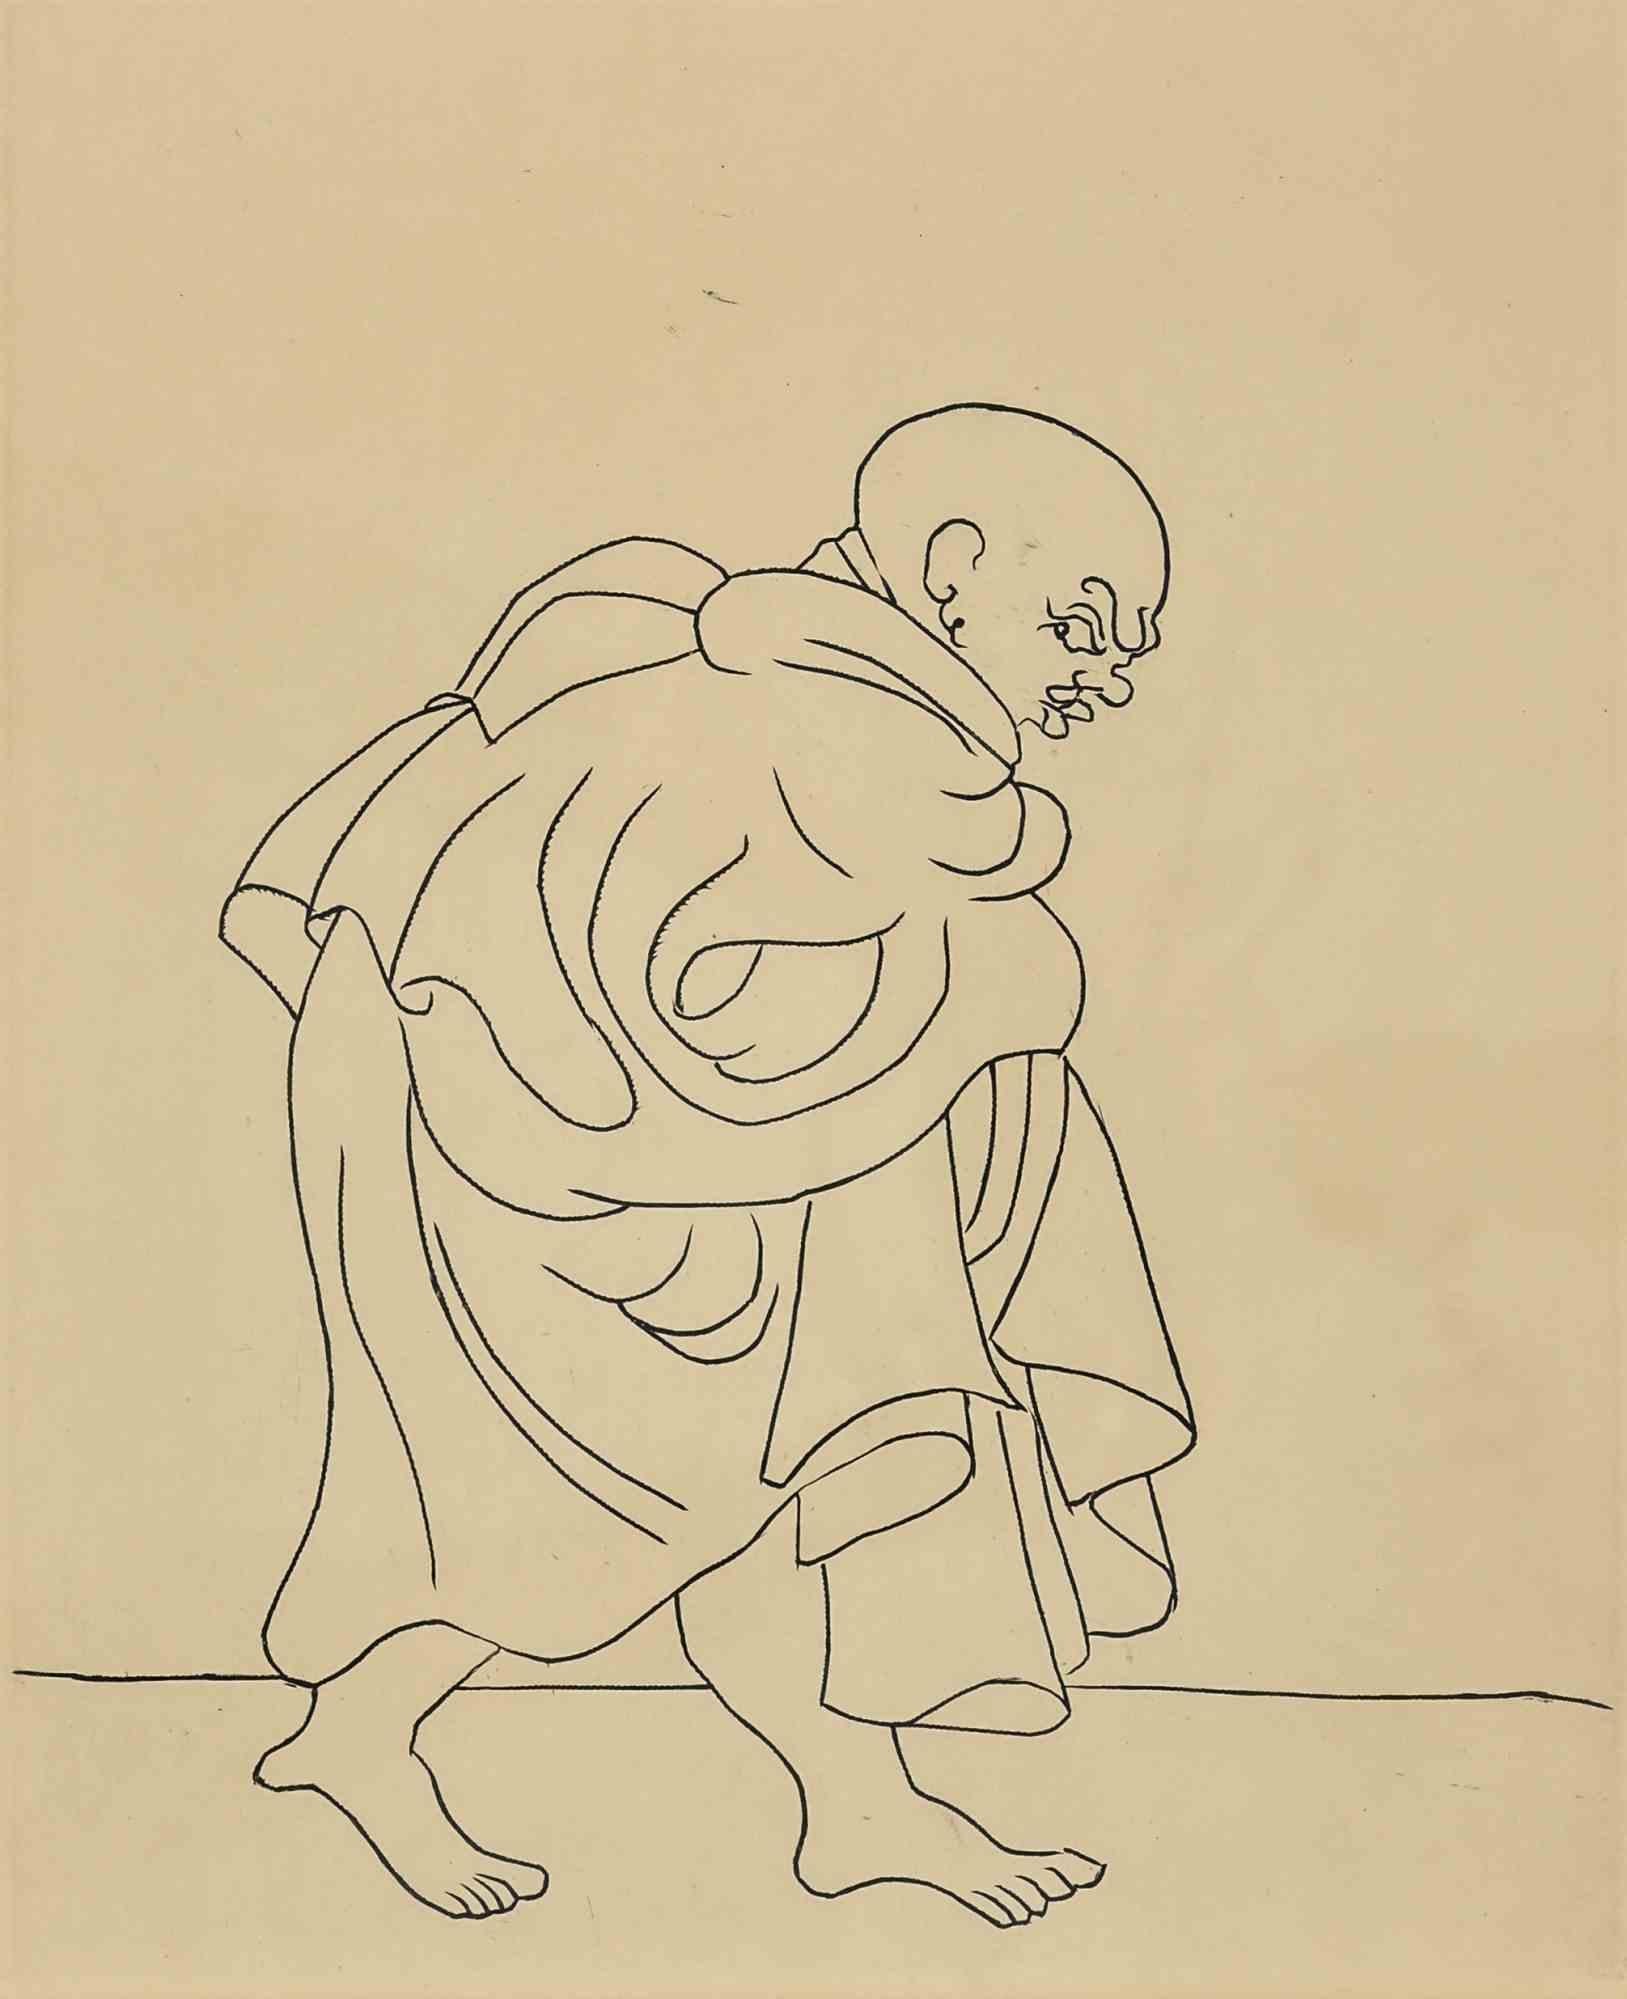 Man hiding is an original modern artwork realized by André Derain.

Etching on paper. From the Suite "Le Satyricon", 1934.

Includes frame.